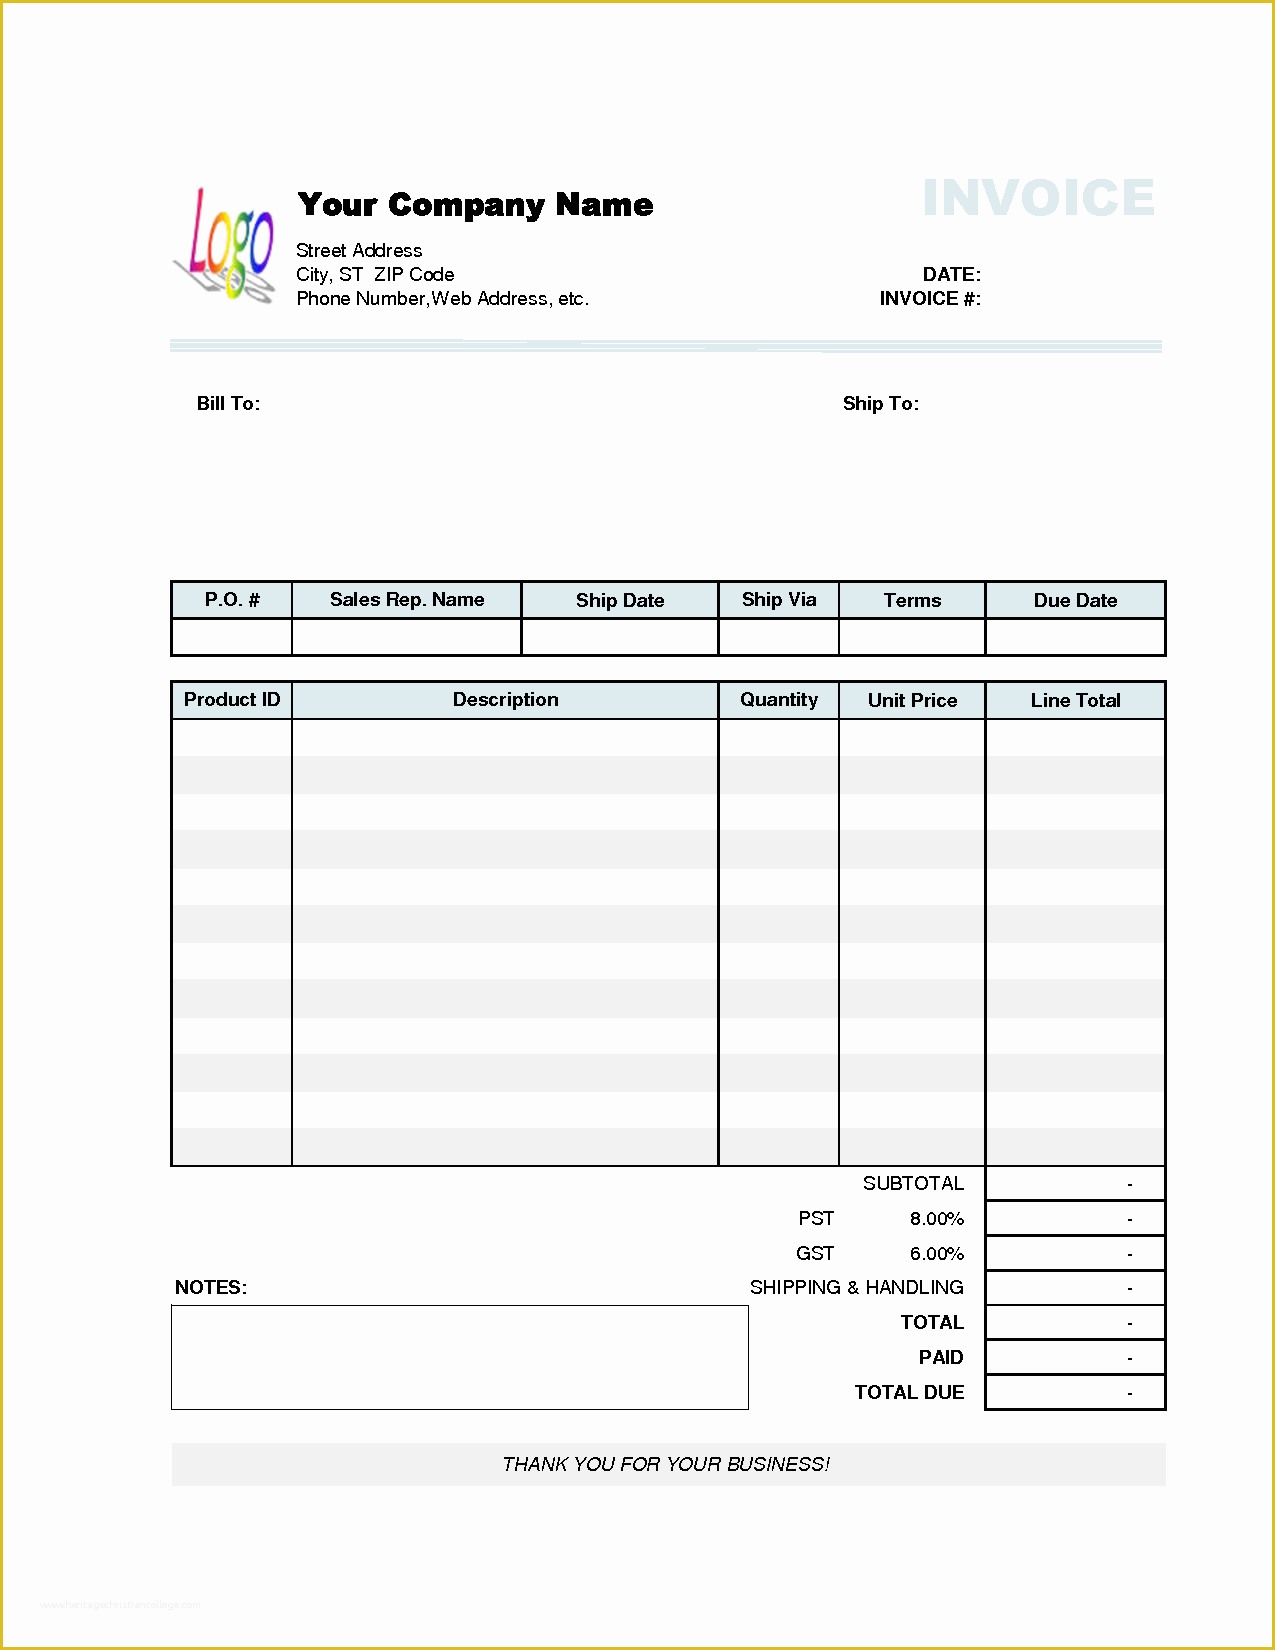 Free Invoice Template Excel Of Invoice Template Excel 2010